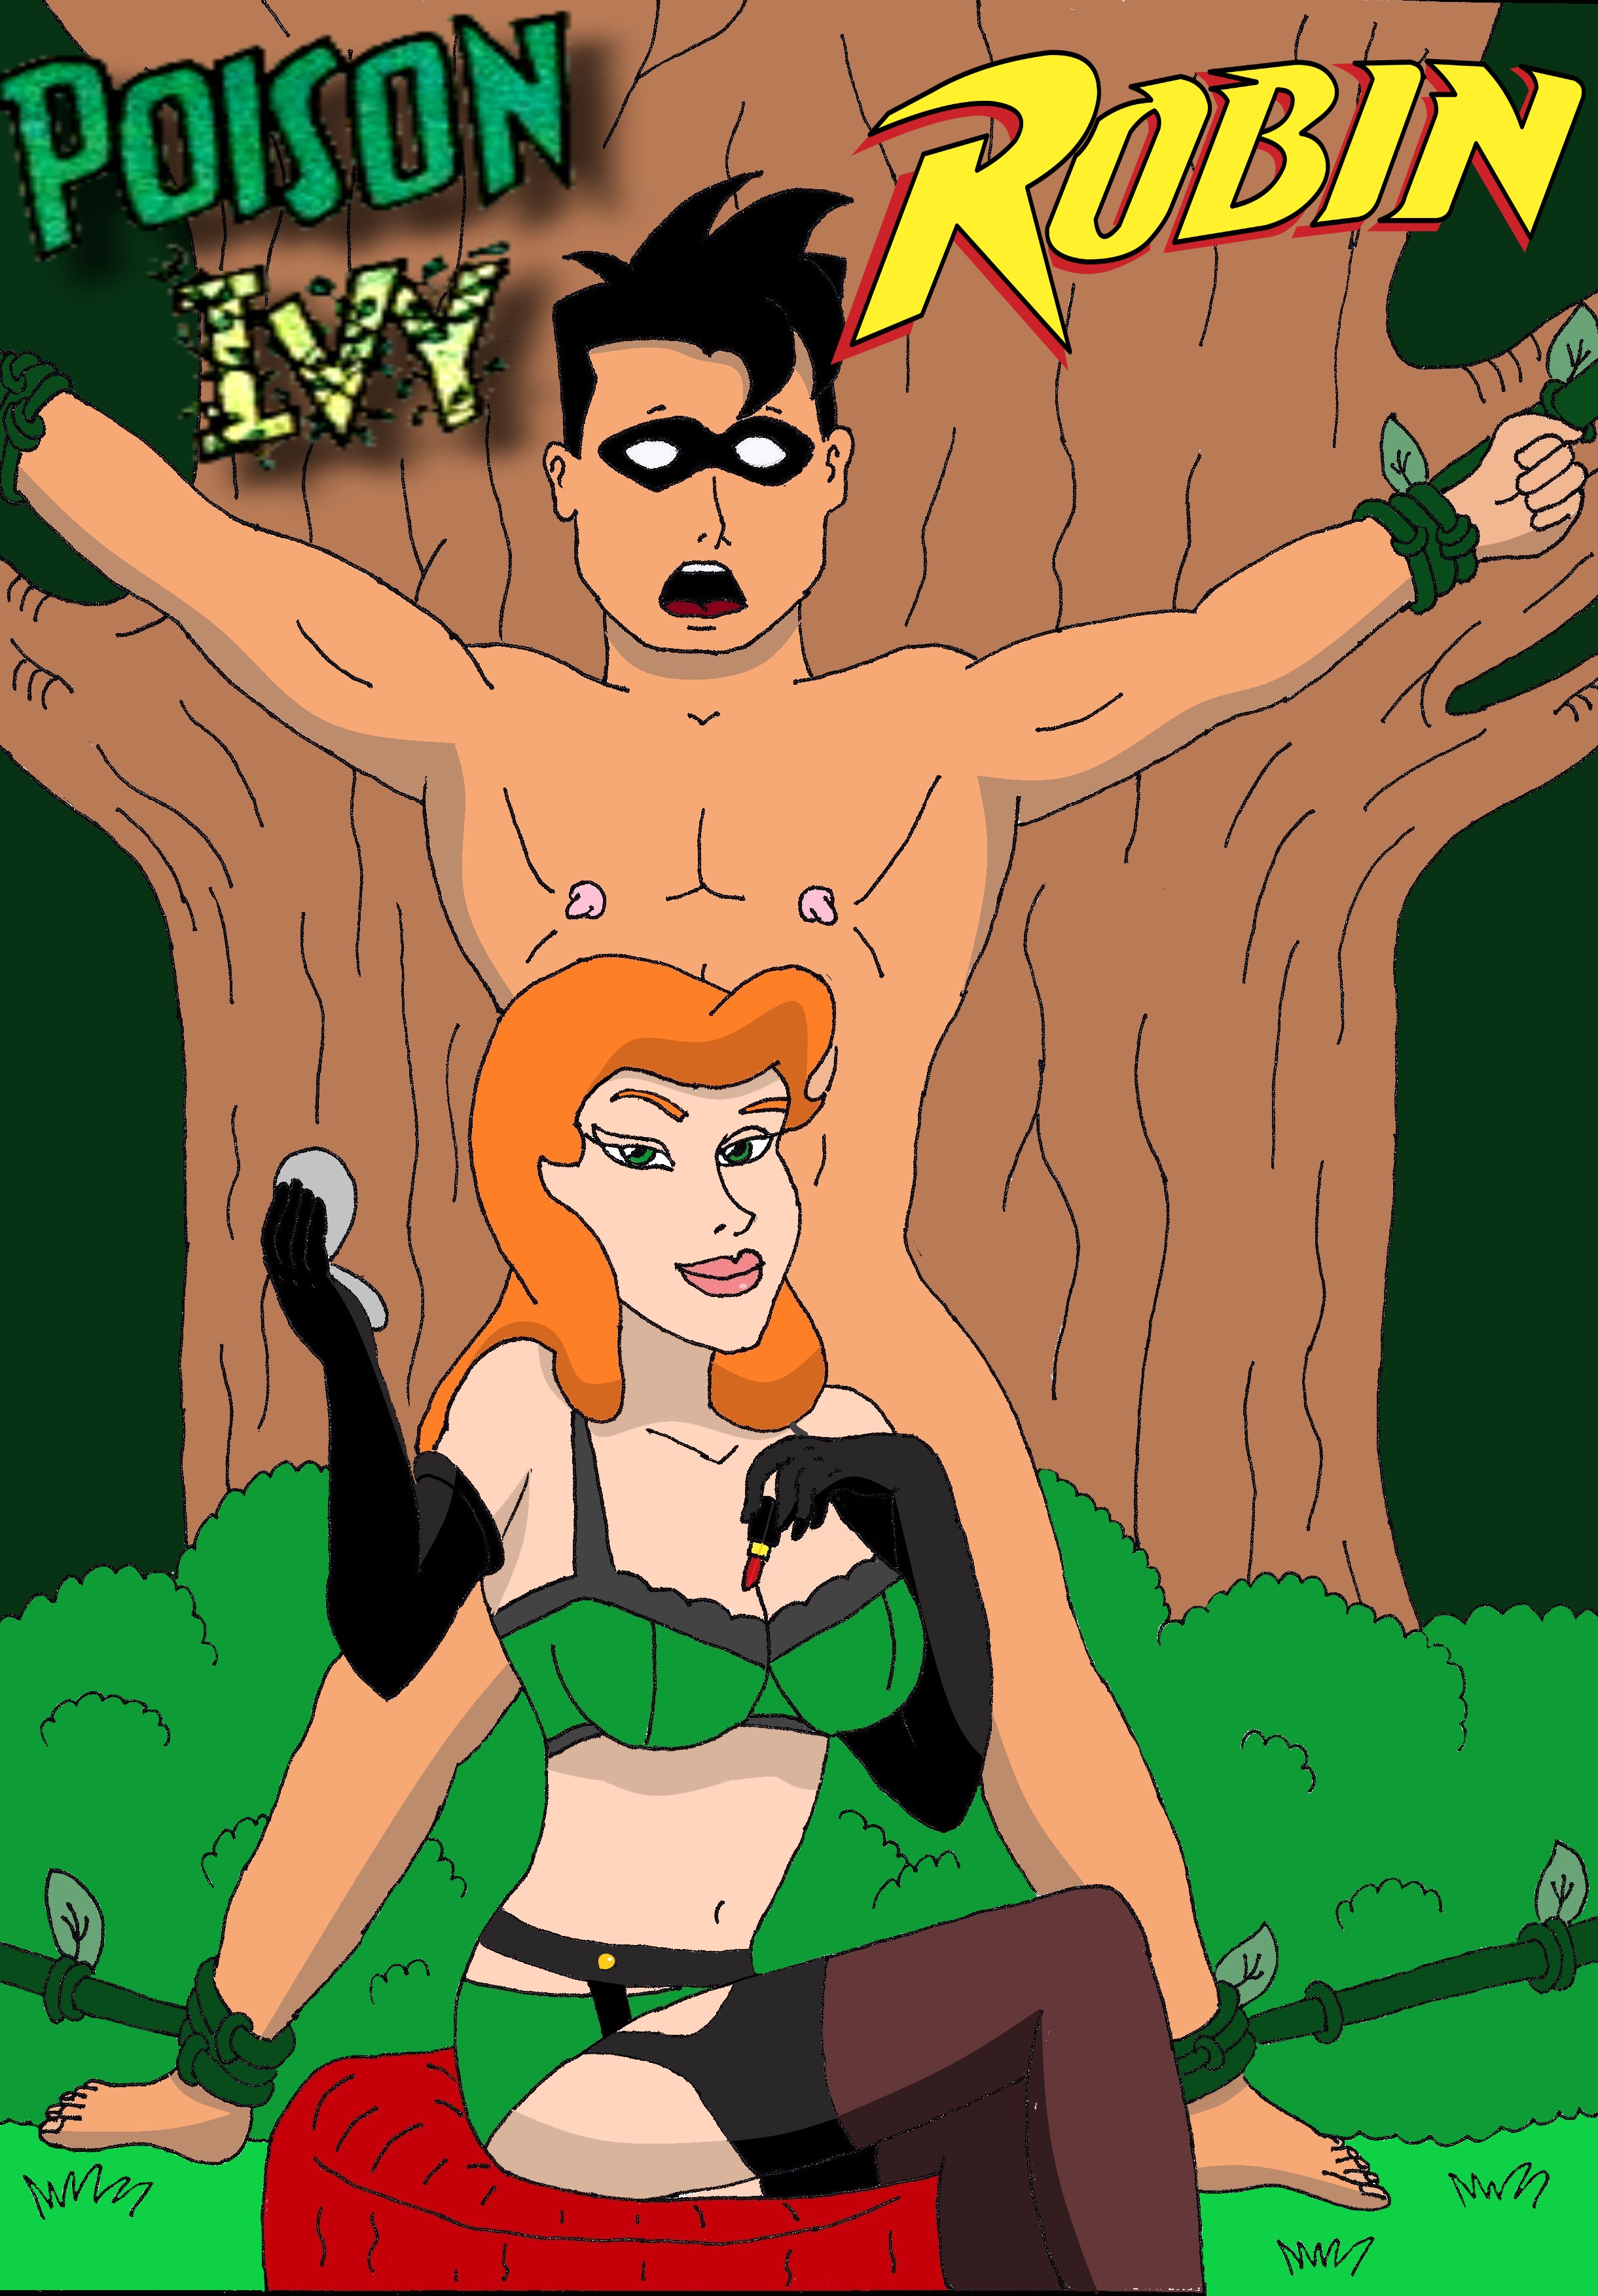 Poison ivy and robin porn comic